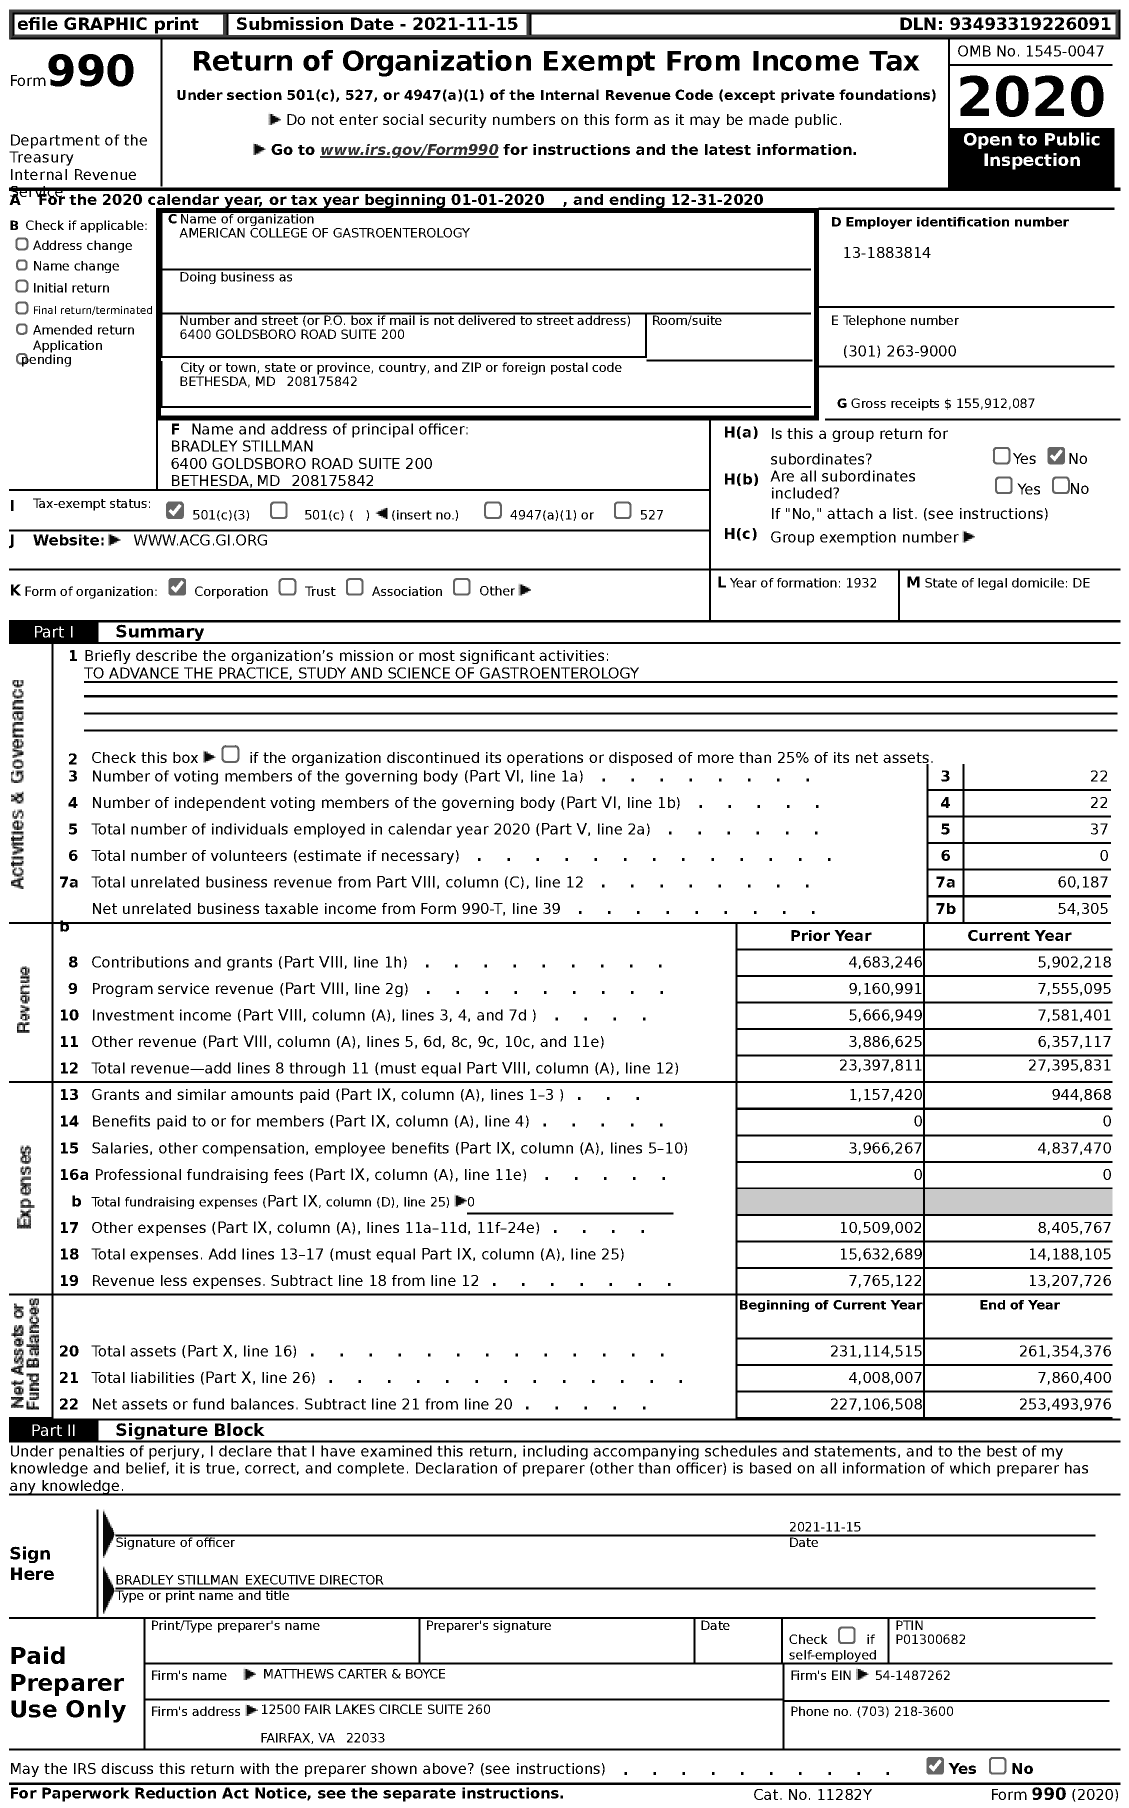 Image of first page of 2020 Form 990 for American College of Gastroenterology (ACG)